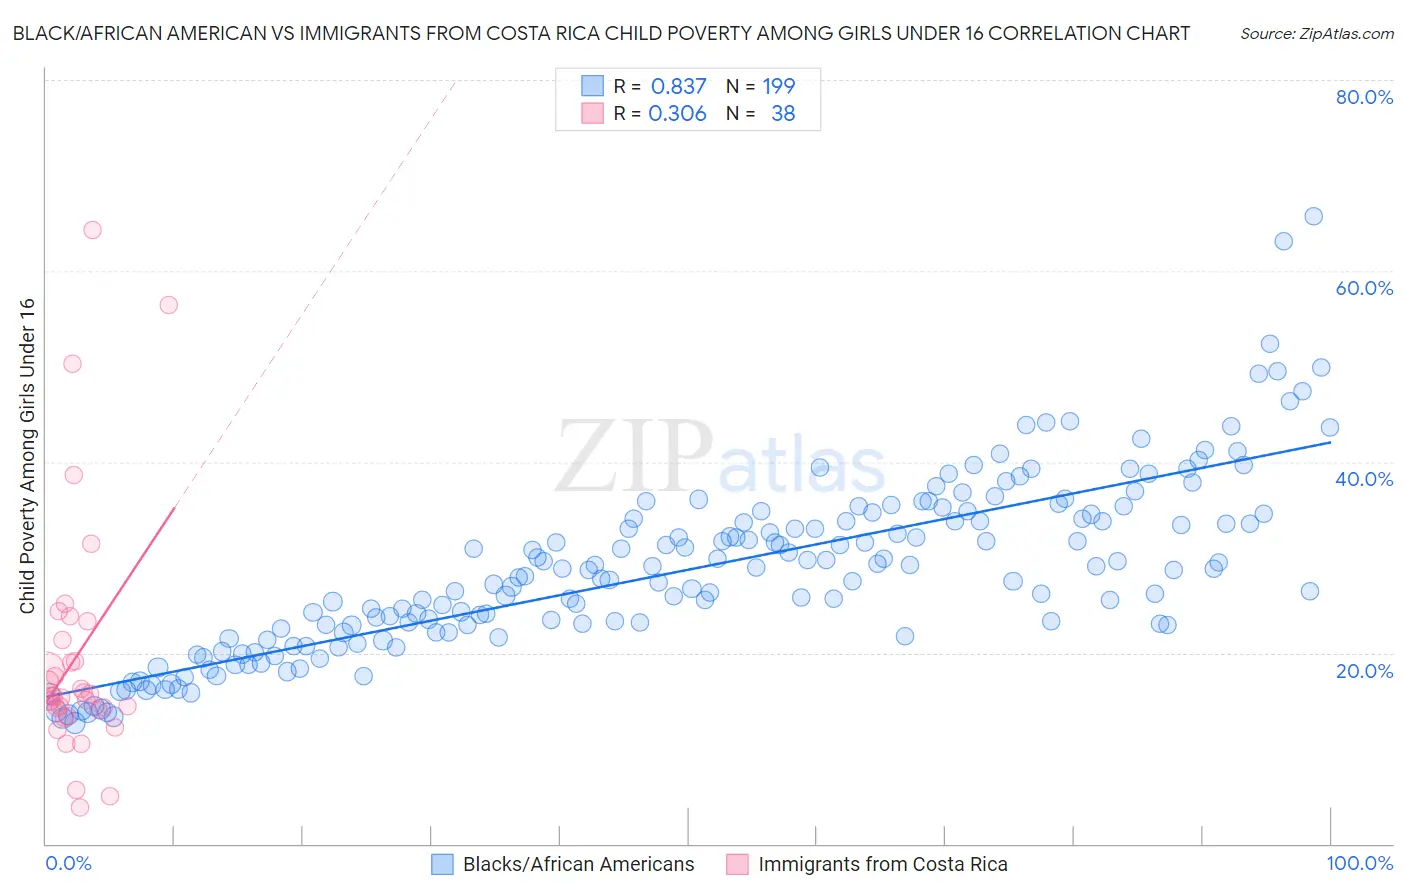 Black/African American vs Immigrants from Costa Rica Child Poverty Among Girls Under 16